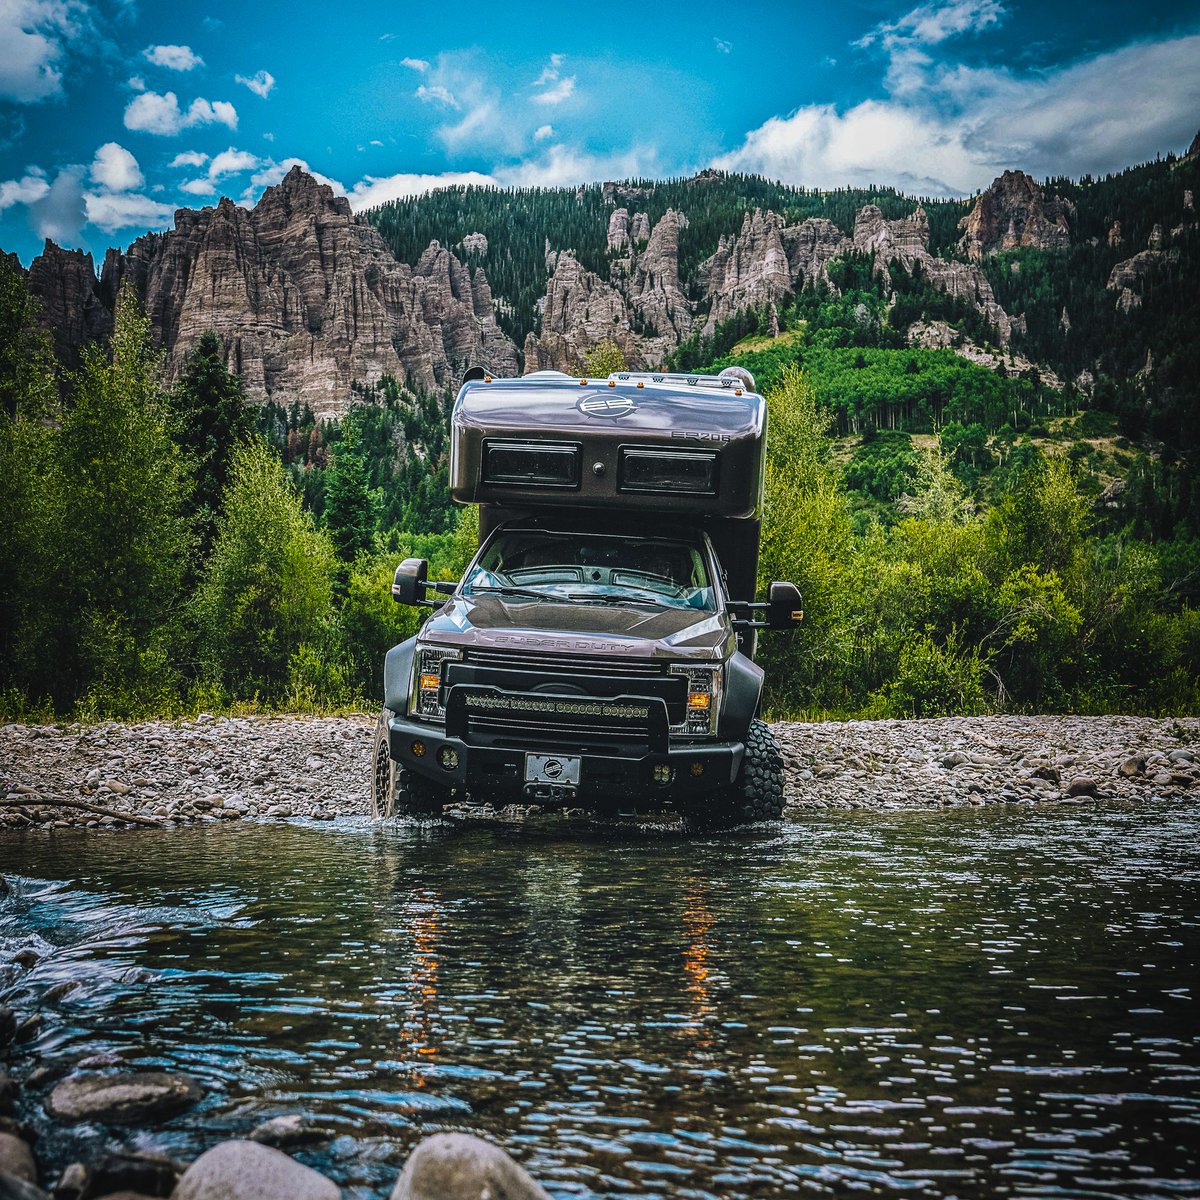 Rippling waters and rocky paths, the perfect trail for an EarthRoamer 🏞️
·
·
·

#earthroamer #offroad4x4 #expeditionvehicle #campinglife #overlanding #4x4life #4x4trucks #vanlife #vanlifeadventures #exploreoutdoors